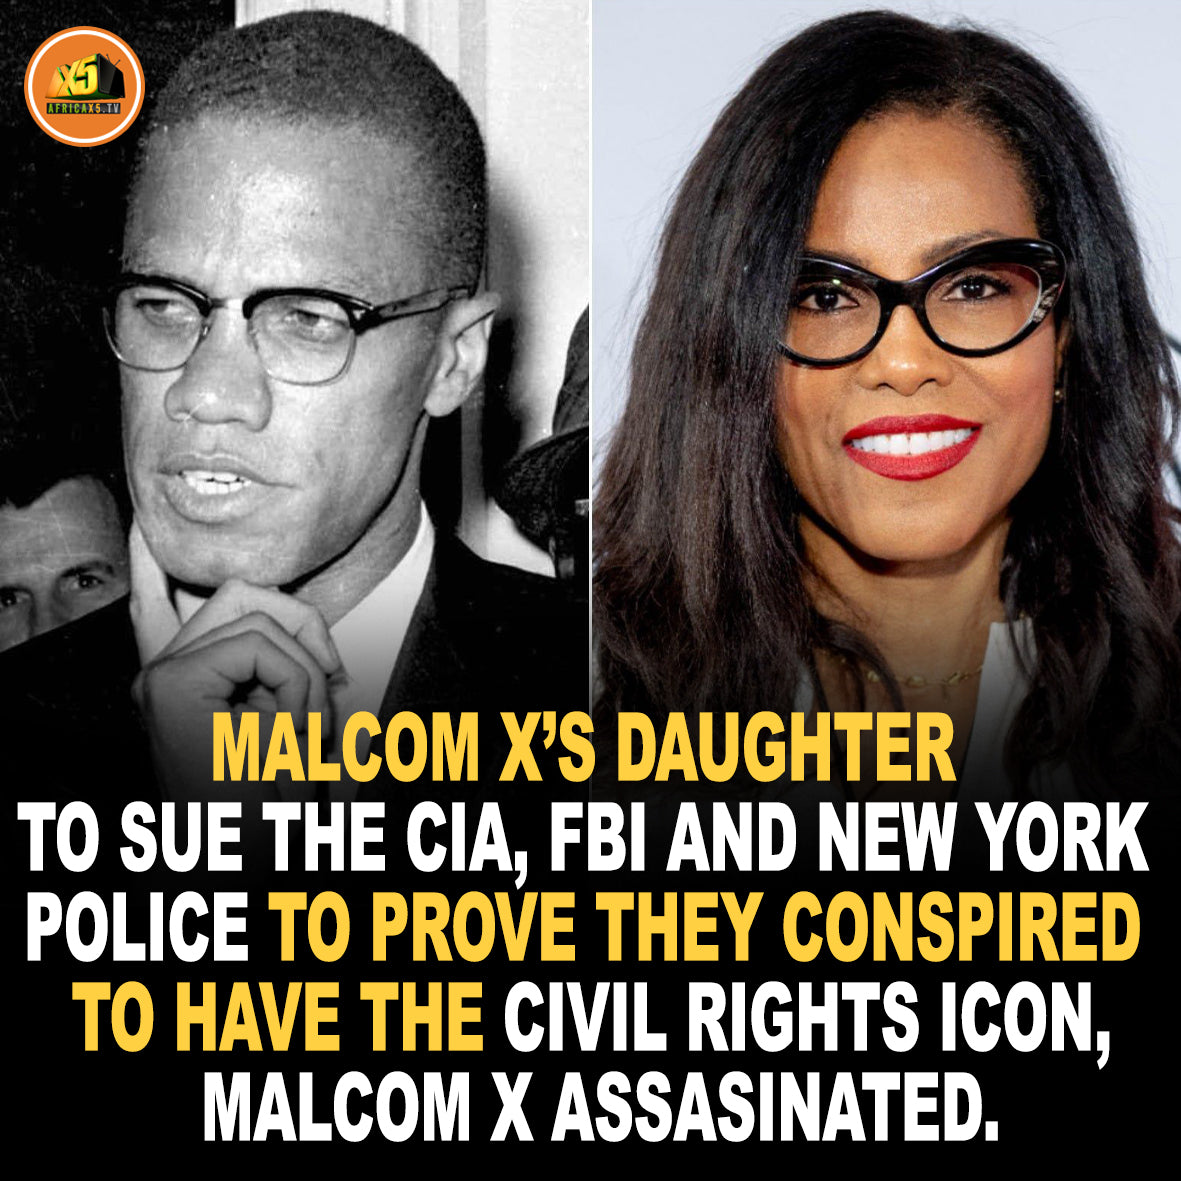 One of Malcolm X’s daughters has launched a $100M lawsuit against the FBI, CIA and New York police, to try to prove they conspired to have the civil rights icon murdered in 1965.